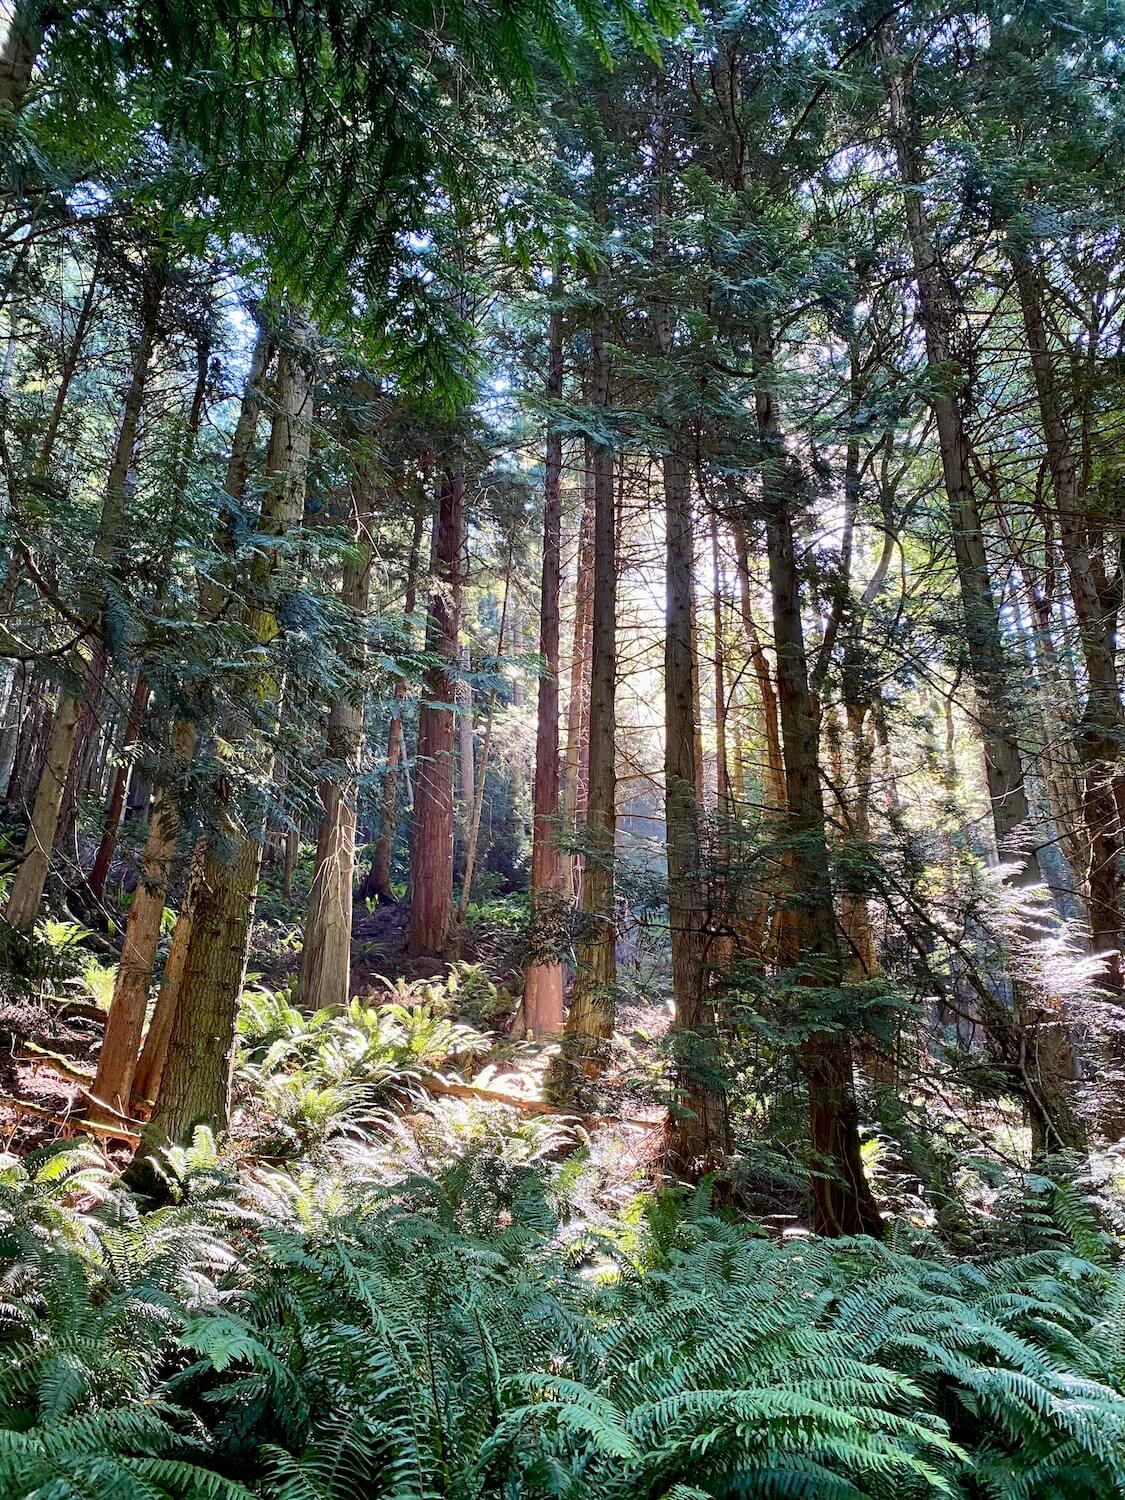 Rich textures of forest come together under the canopy of this Washington State Park.  tall fir trees, sword ferns and light shining through them all highlight this peaceful forest scene.